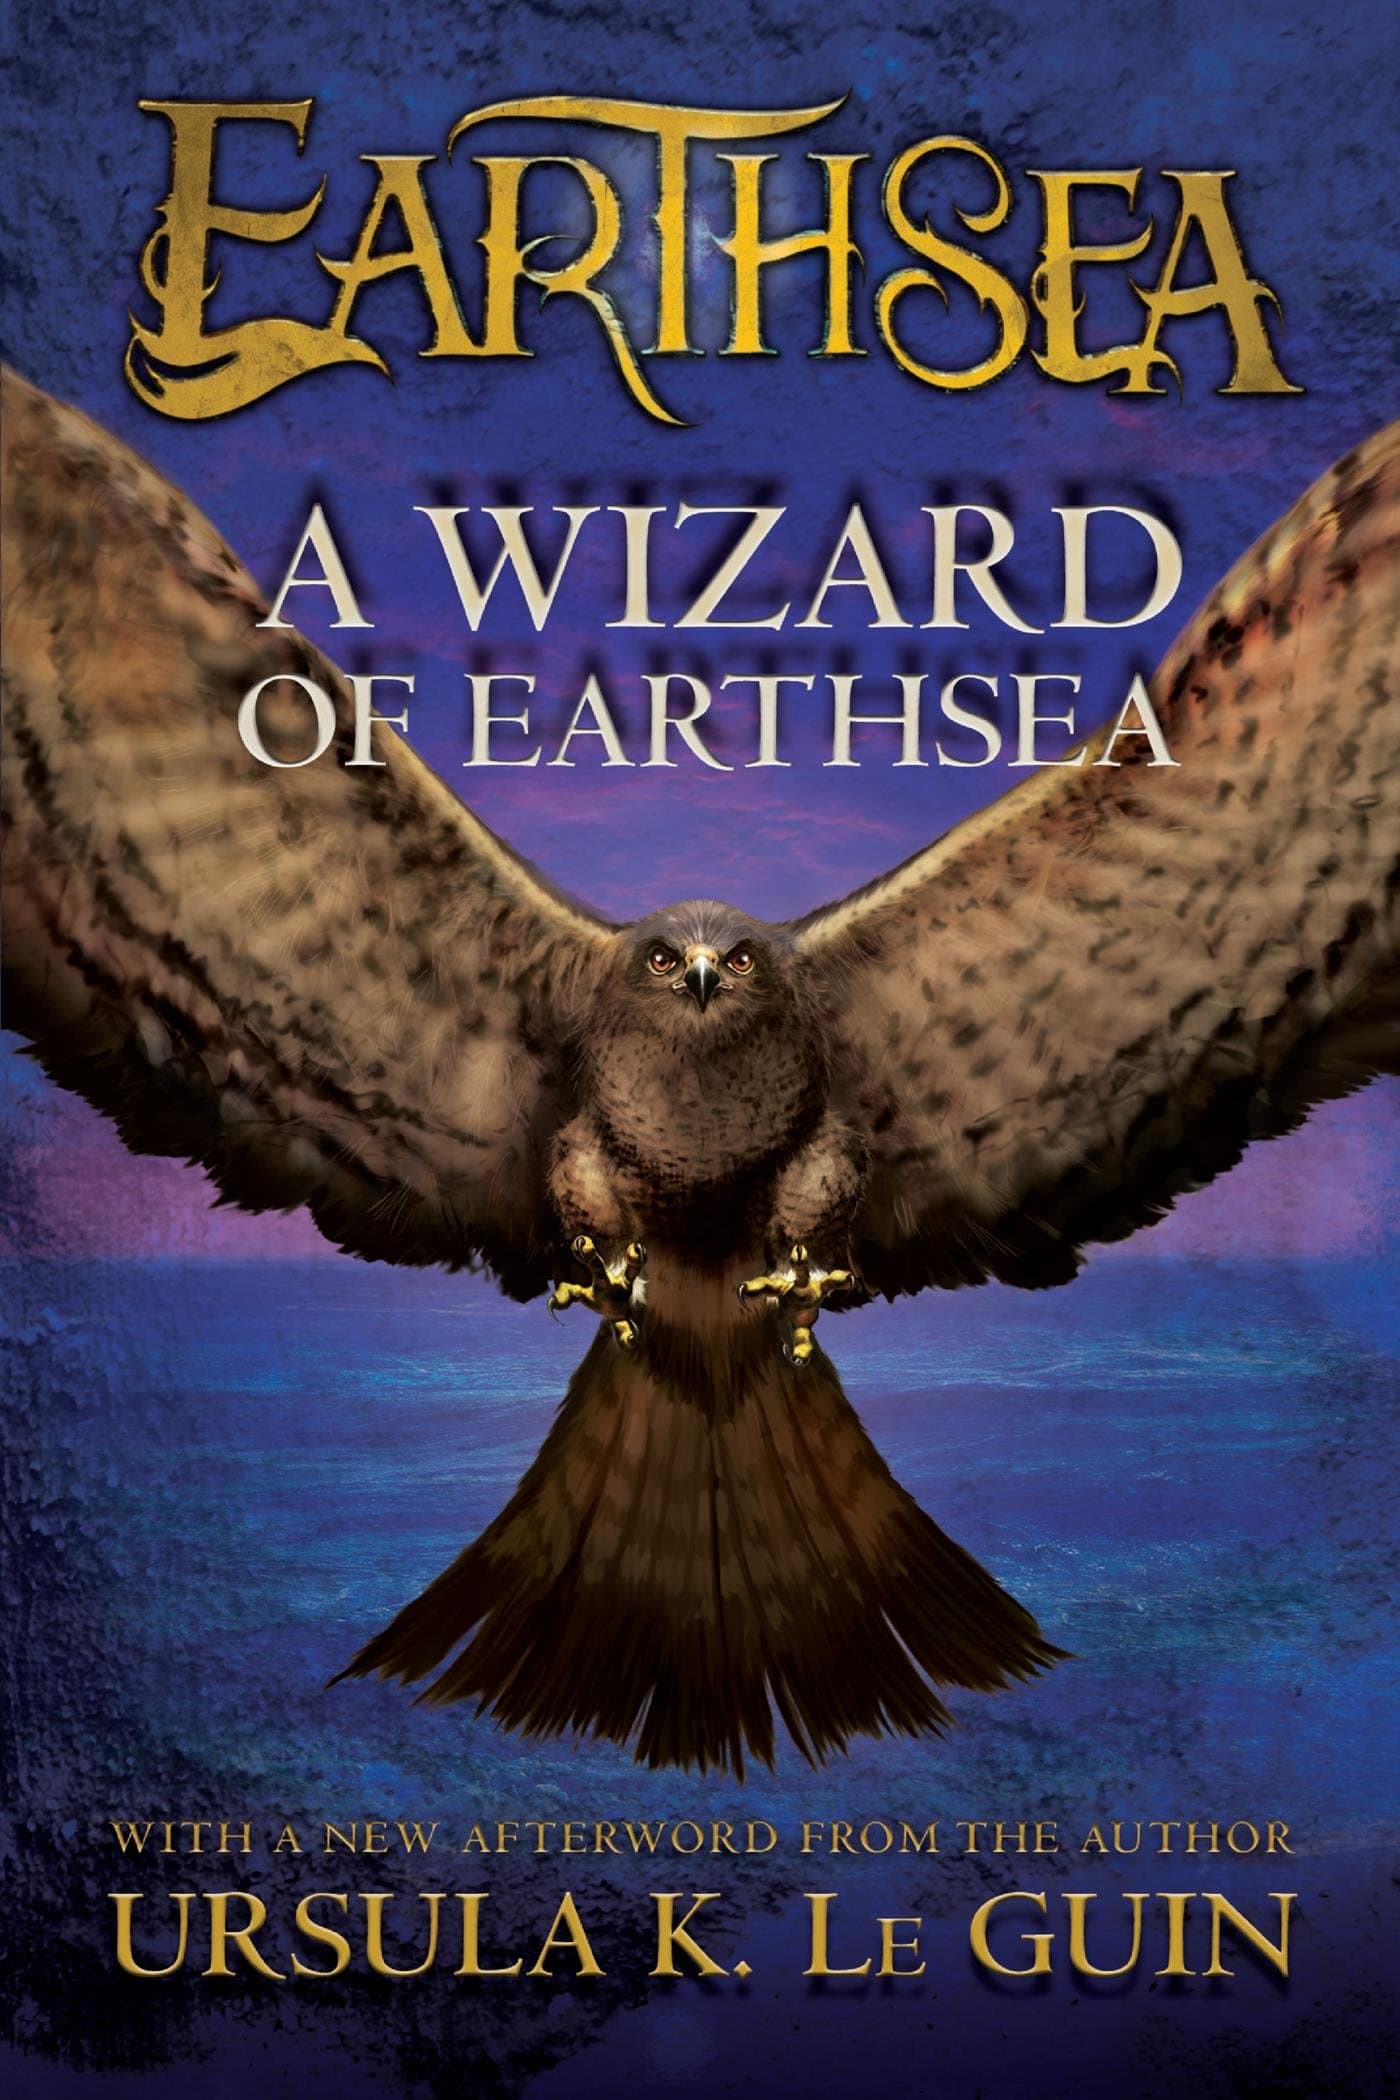 The cover of A Wizard of Earthsea